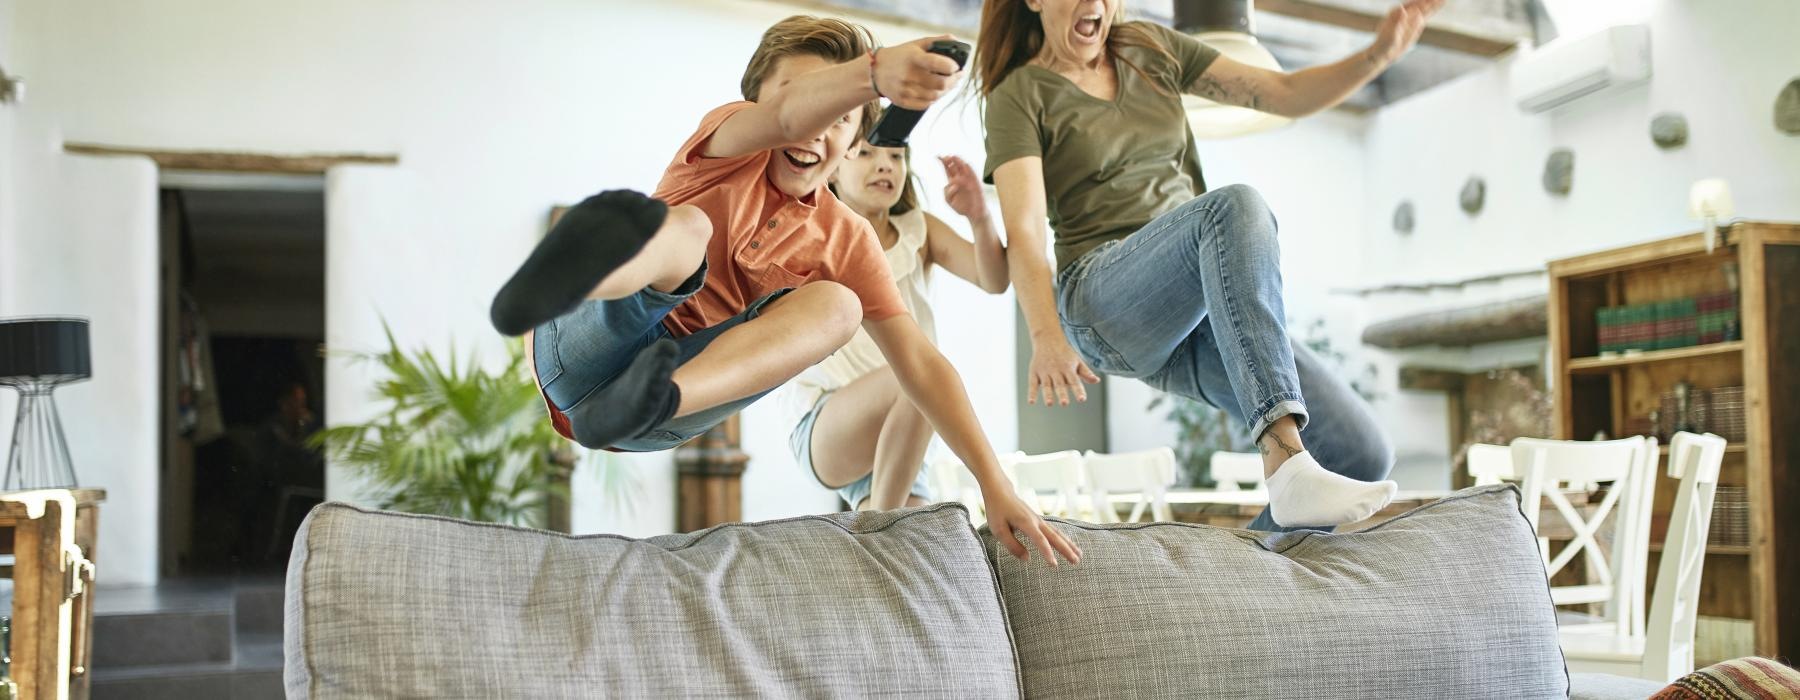 a group of people jumping on a couch